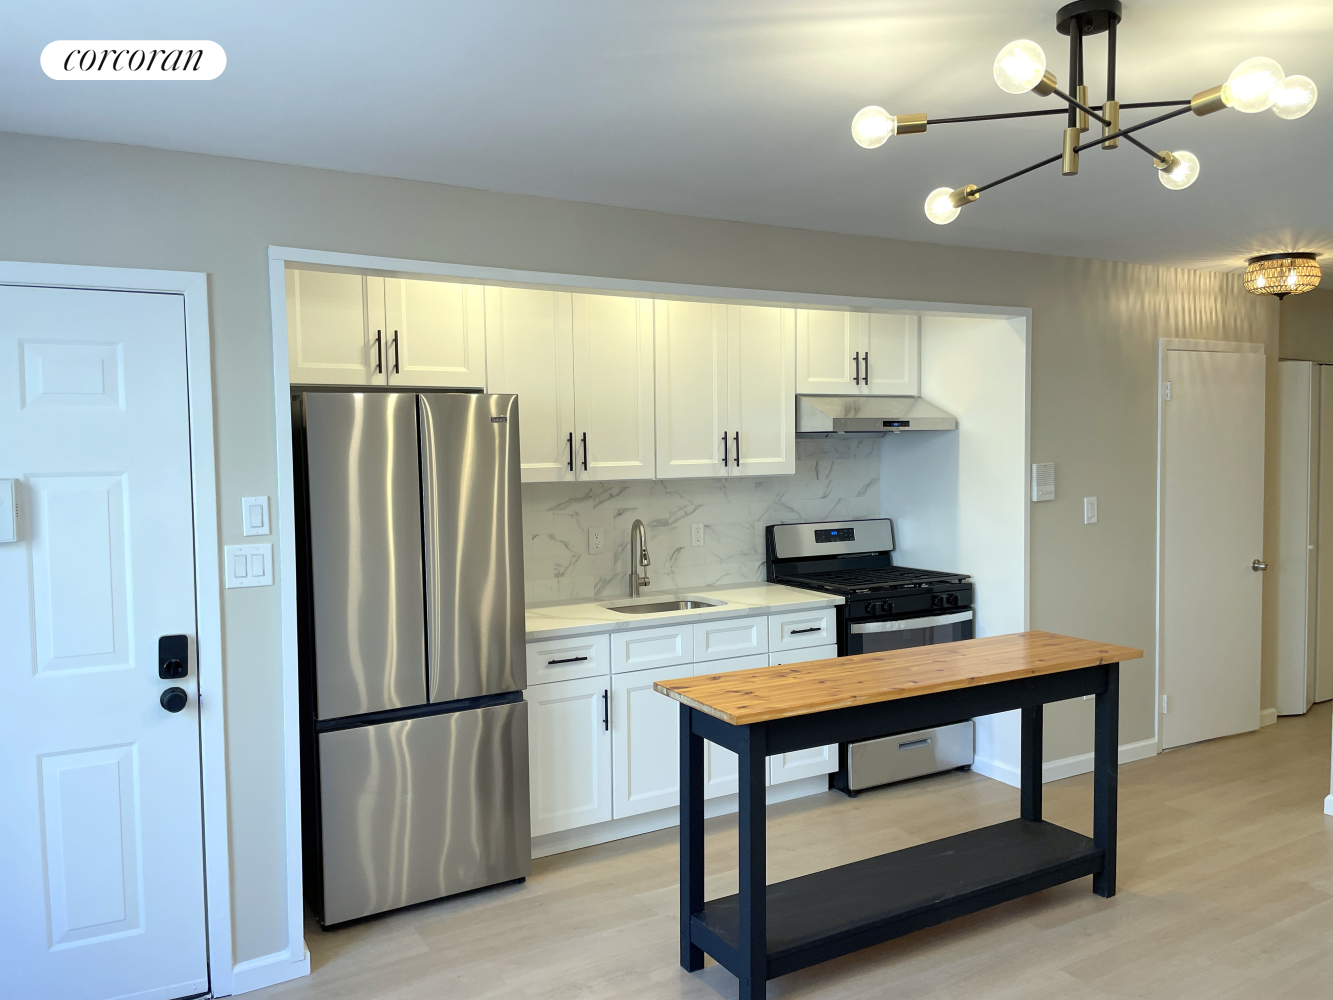 a kitchen with stainless steel appliances a refrigerator a sink dishwasher a stove and a refrigerator